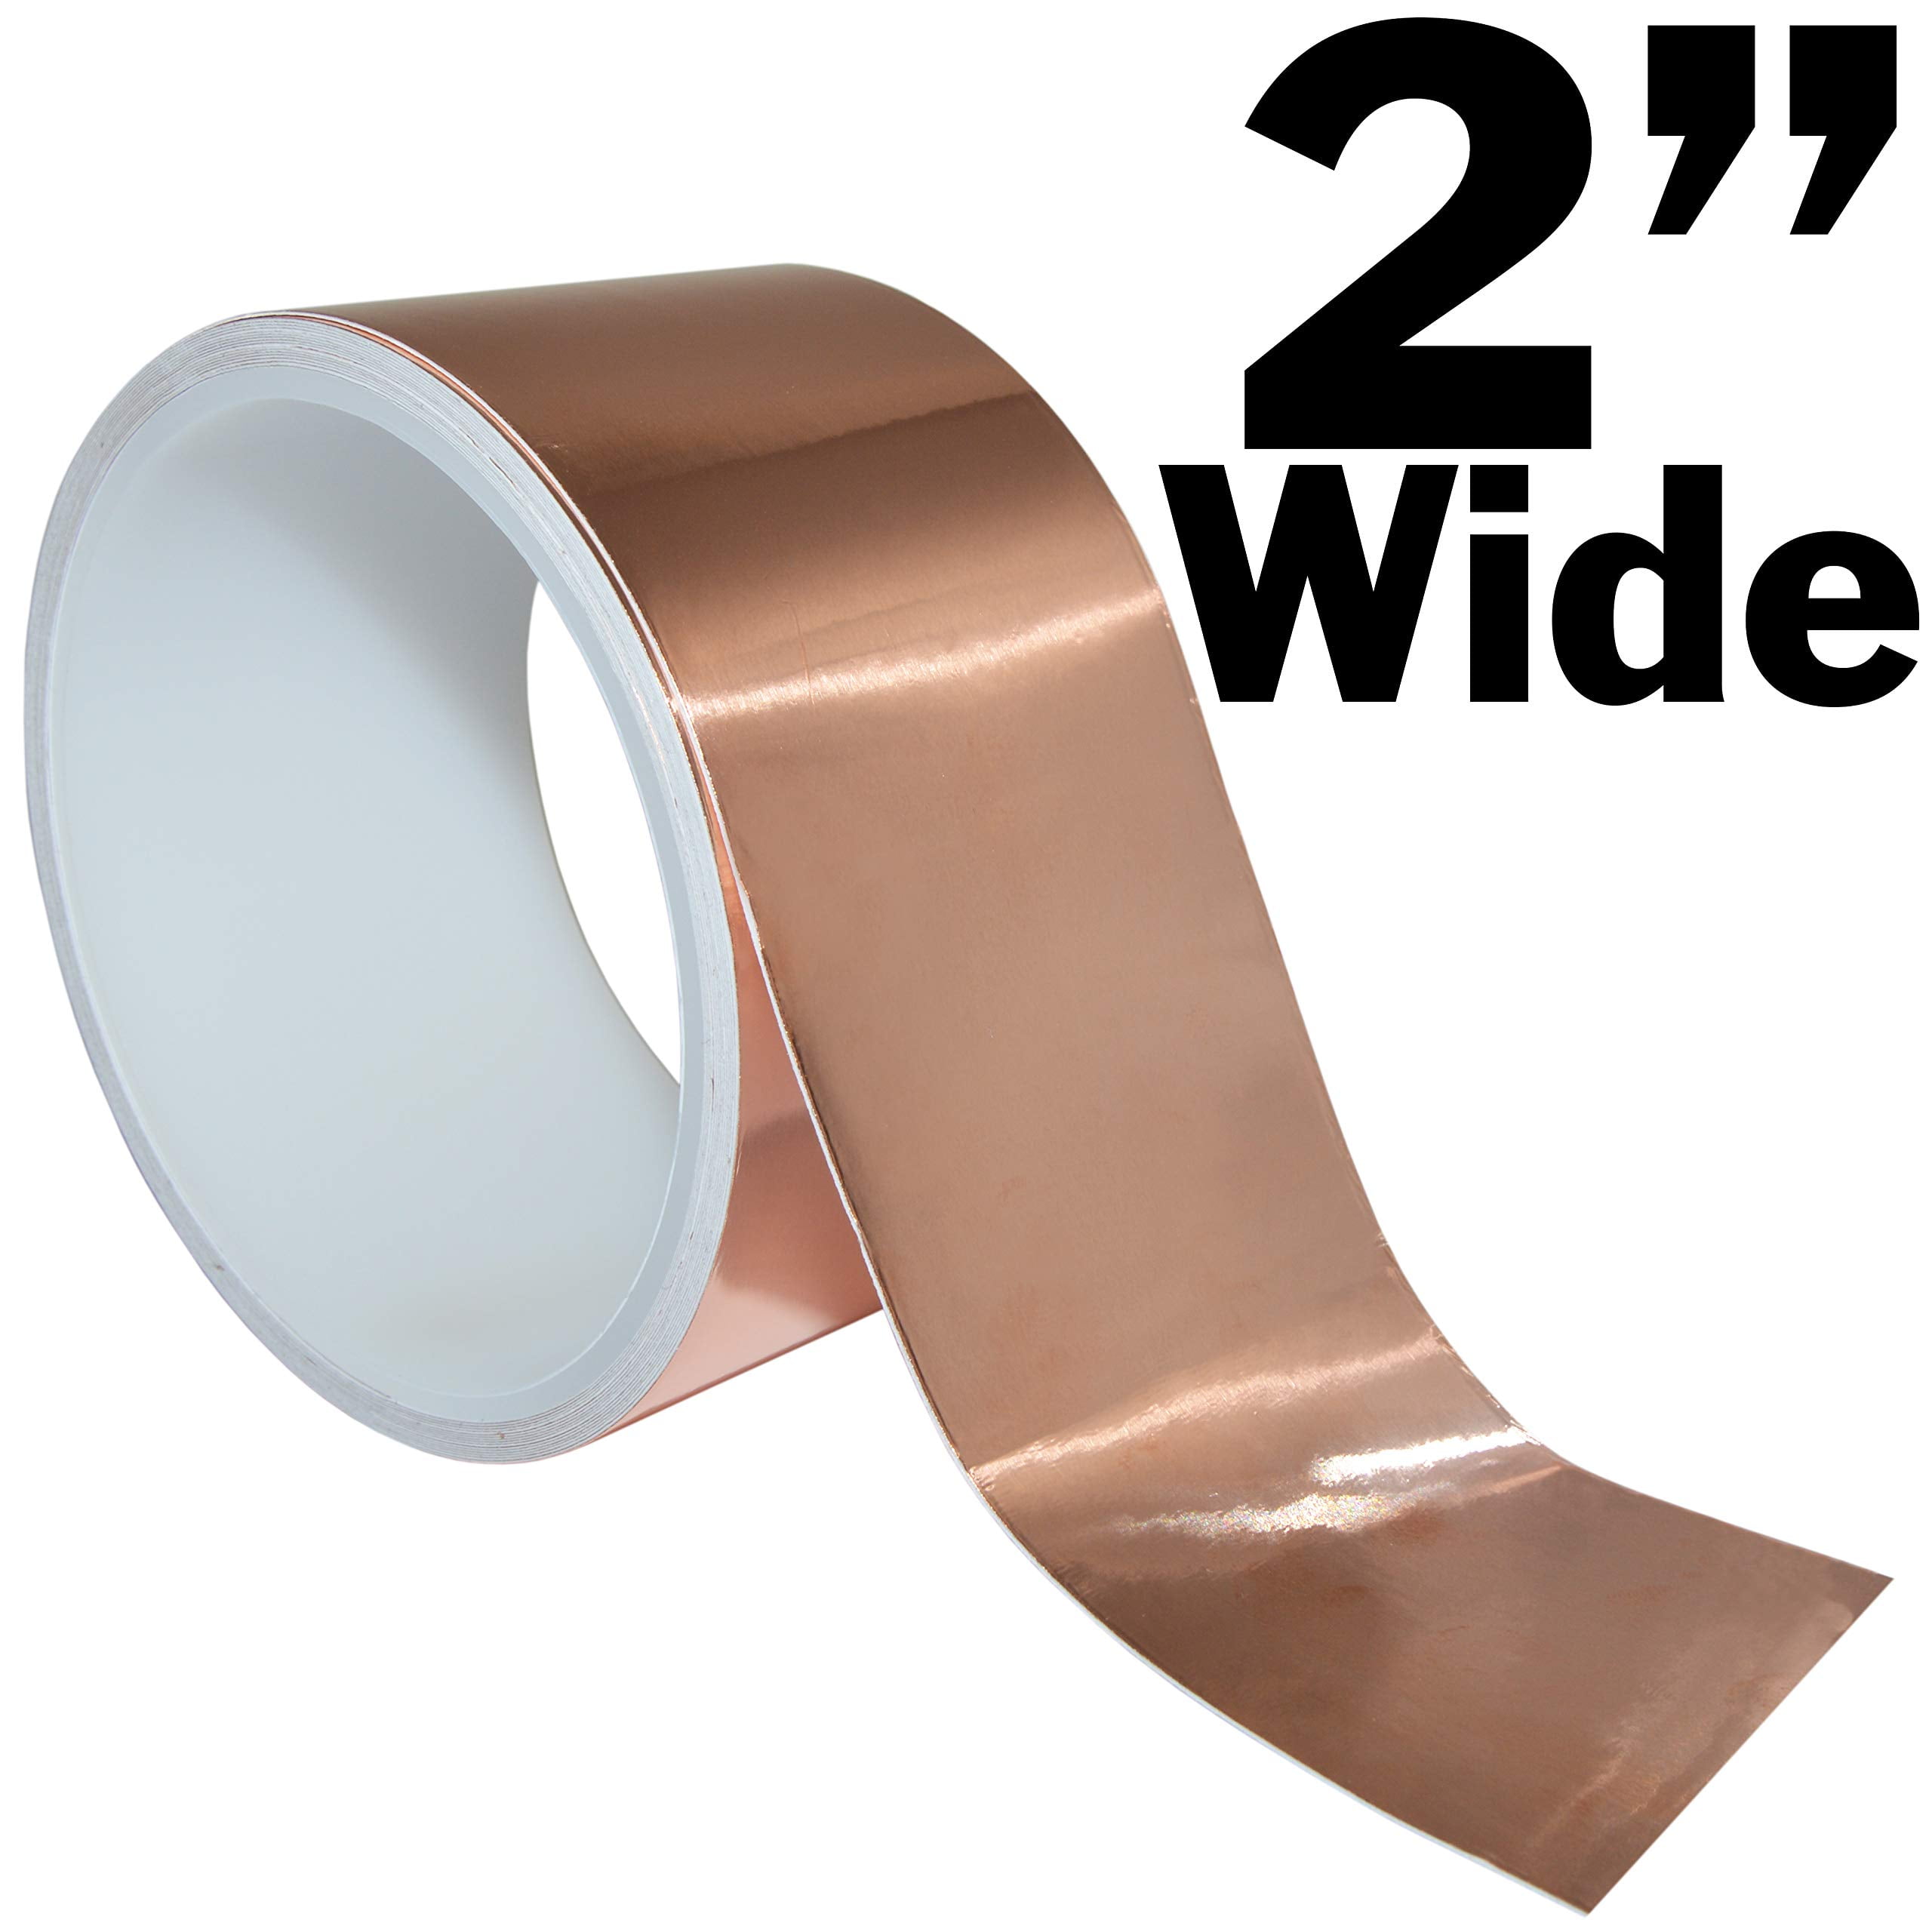 70mm2 Motor Copper Ground Tape with Tinned Ends Length 300mm to 400A